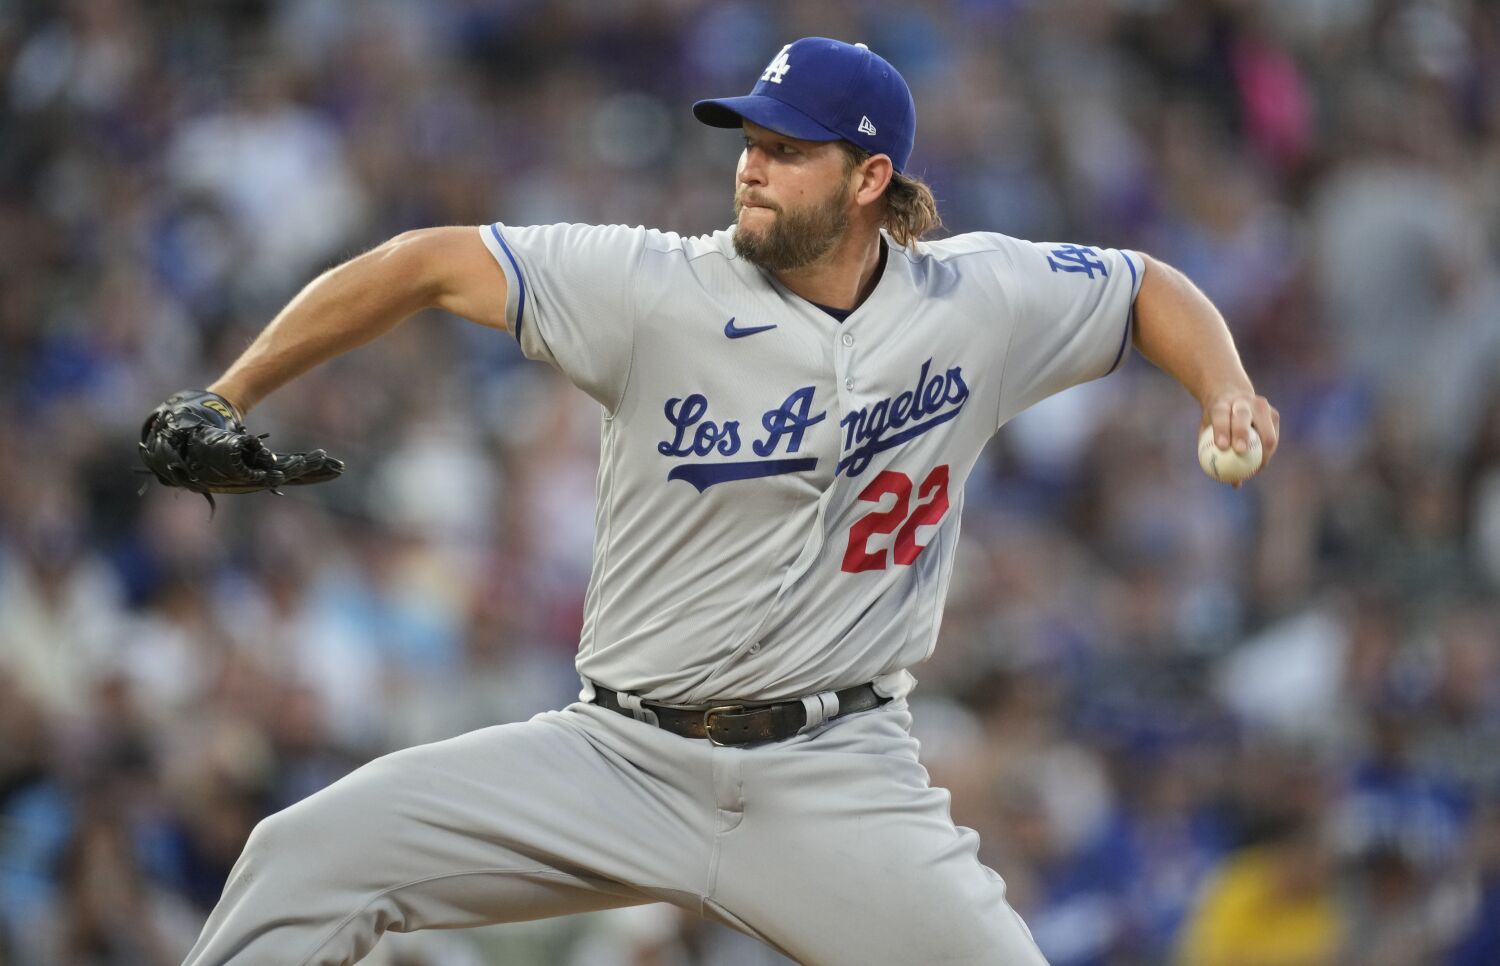 Clayton Kershaw flirts with no-hitter as Dodgers blank Rockies